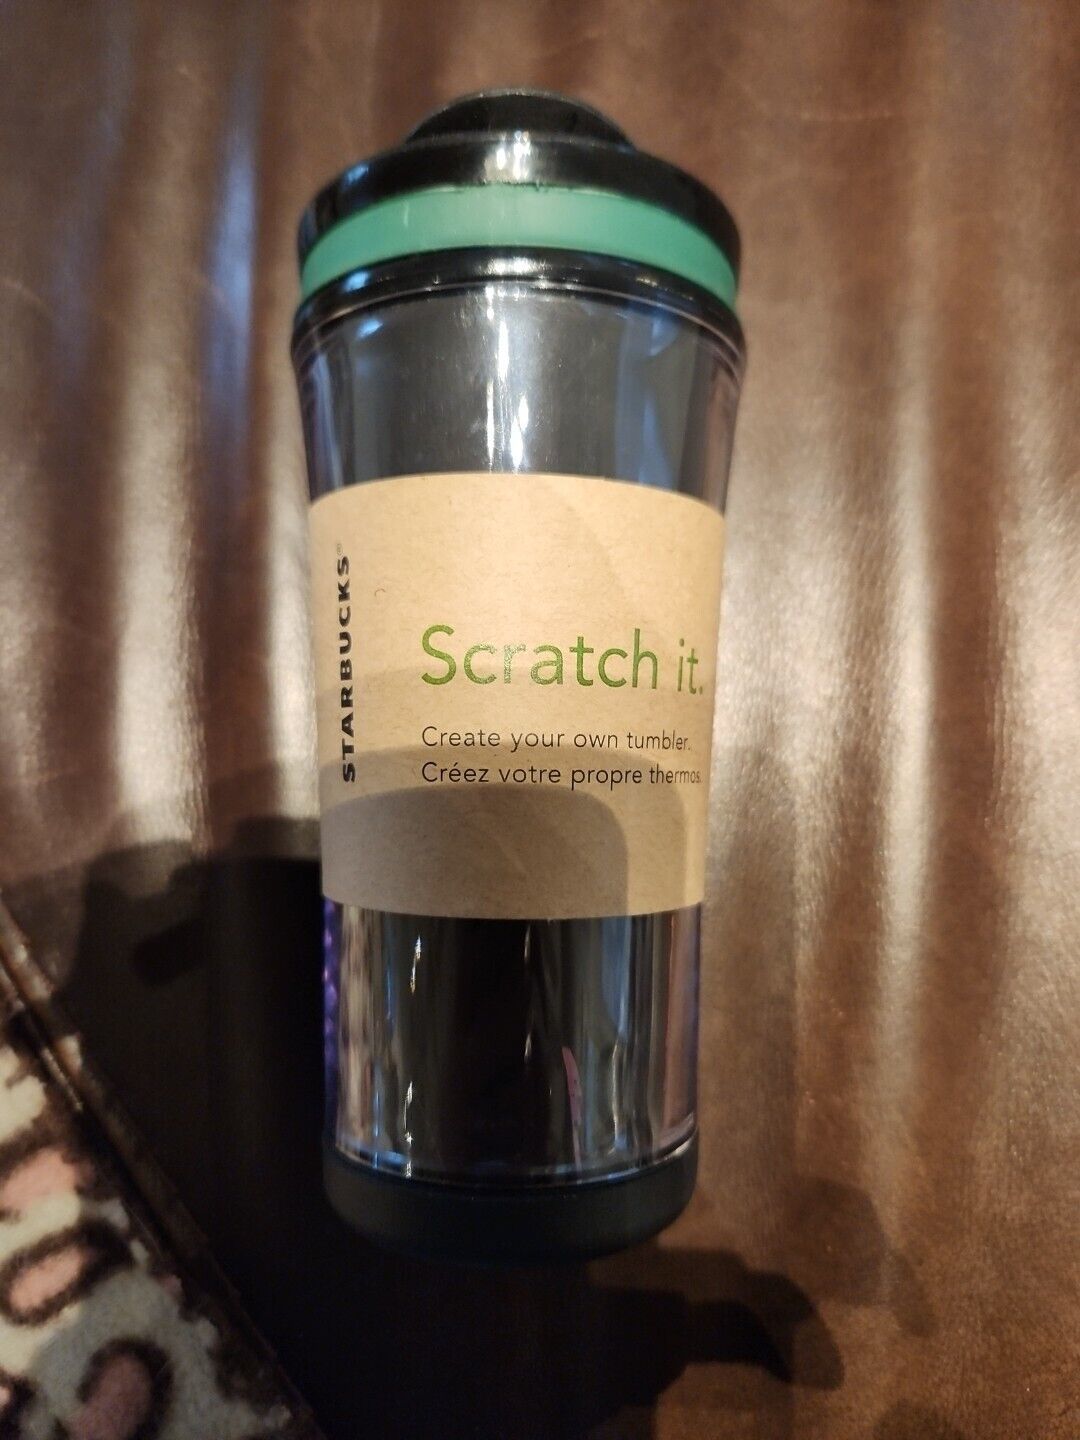 Starbucks Scratch It. Create Your Own Tumbler 8 Ounce 2011 DIY To Go Cup New! - $26.63